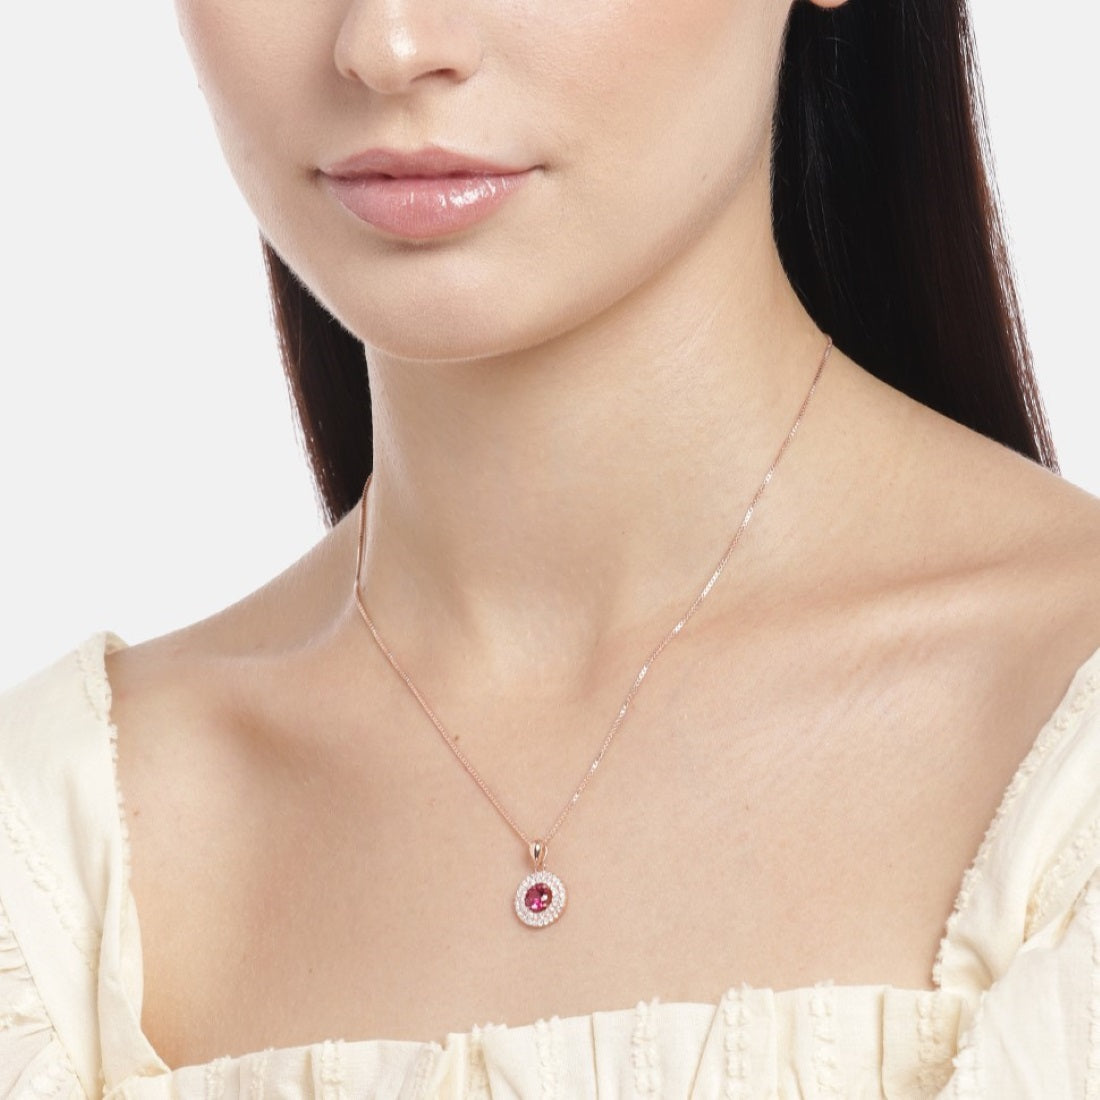 Crimson Radiance Rose Gold-Plated Circle Pendant 925 Sterling Silver Pendant with Chain